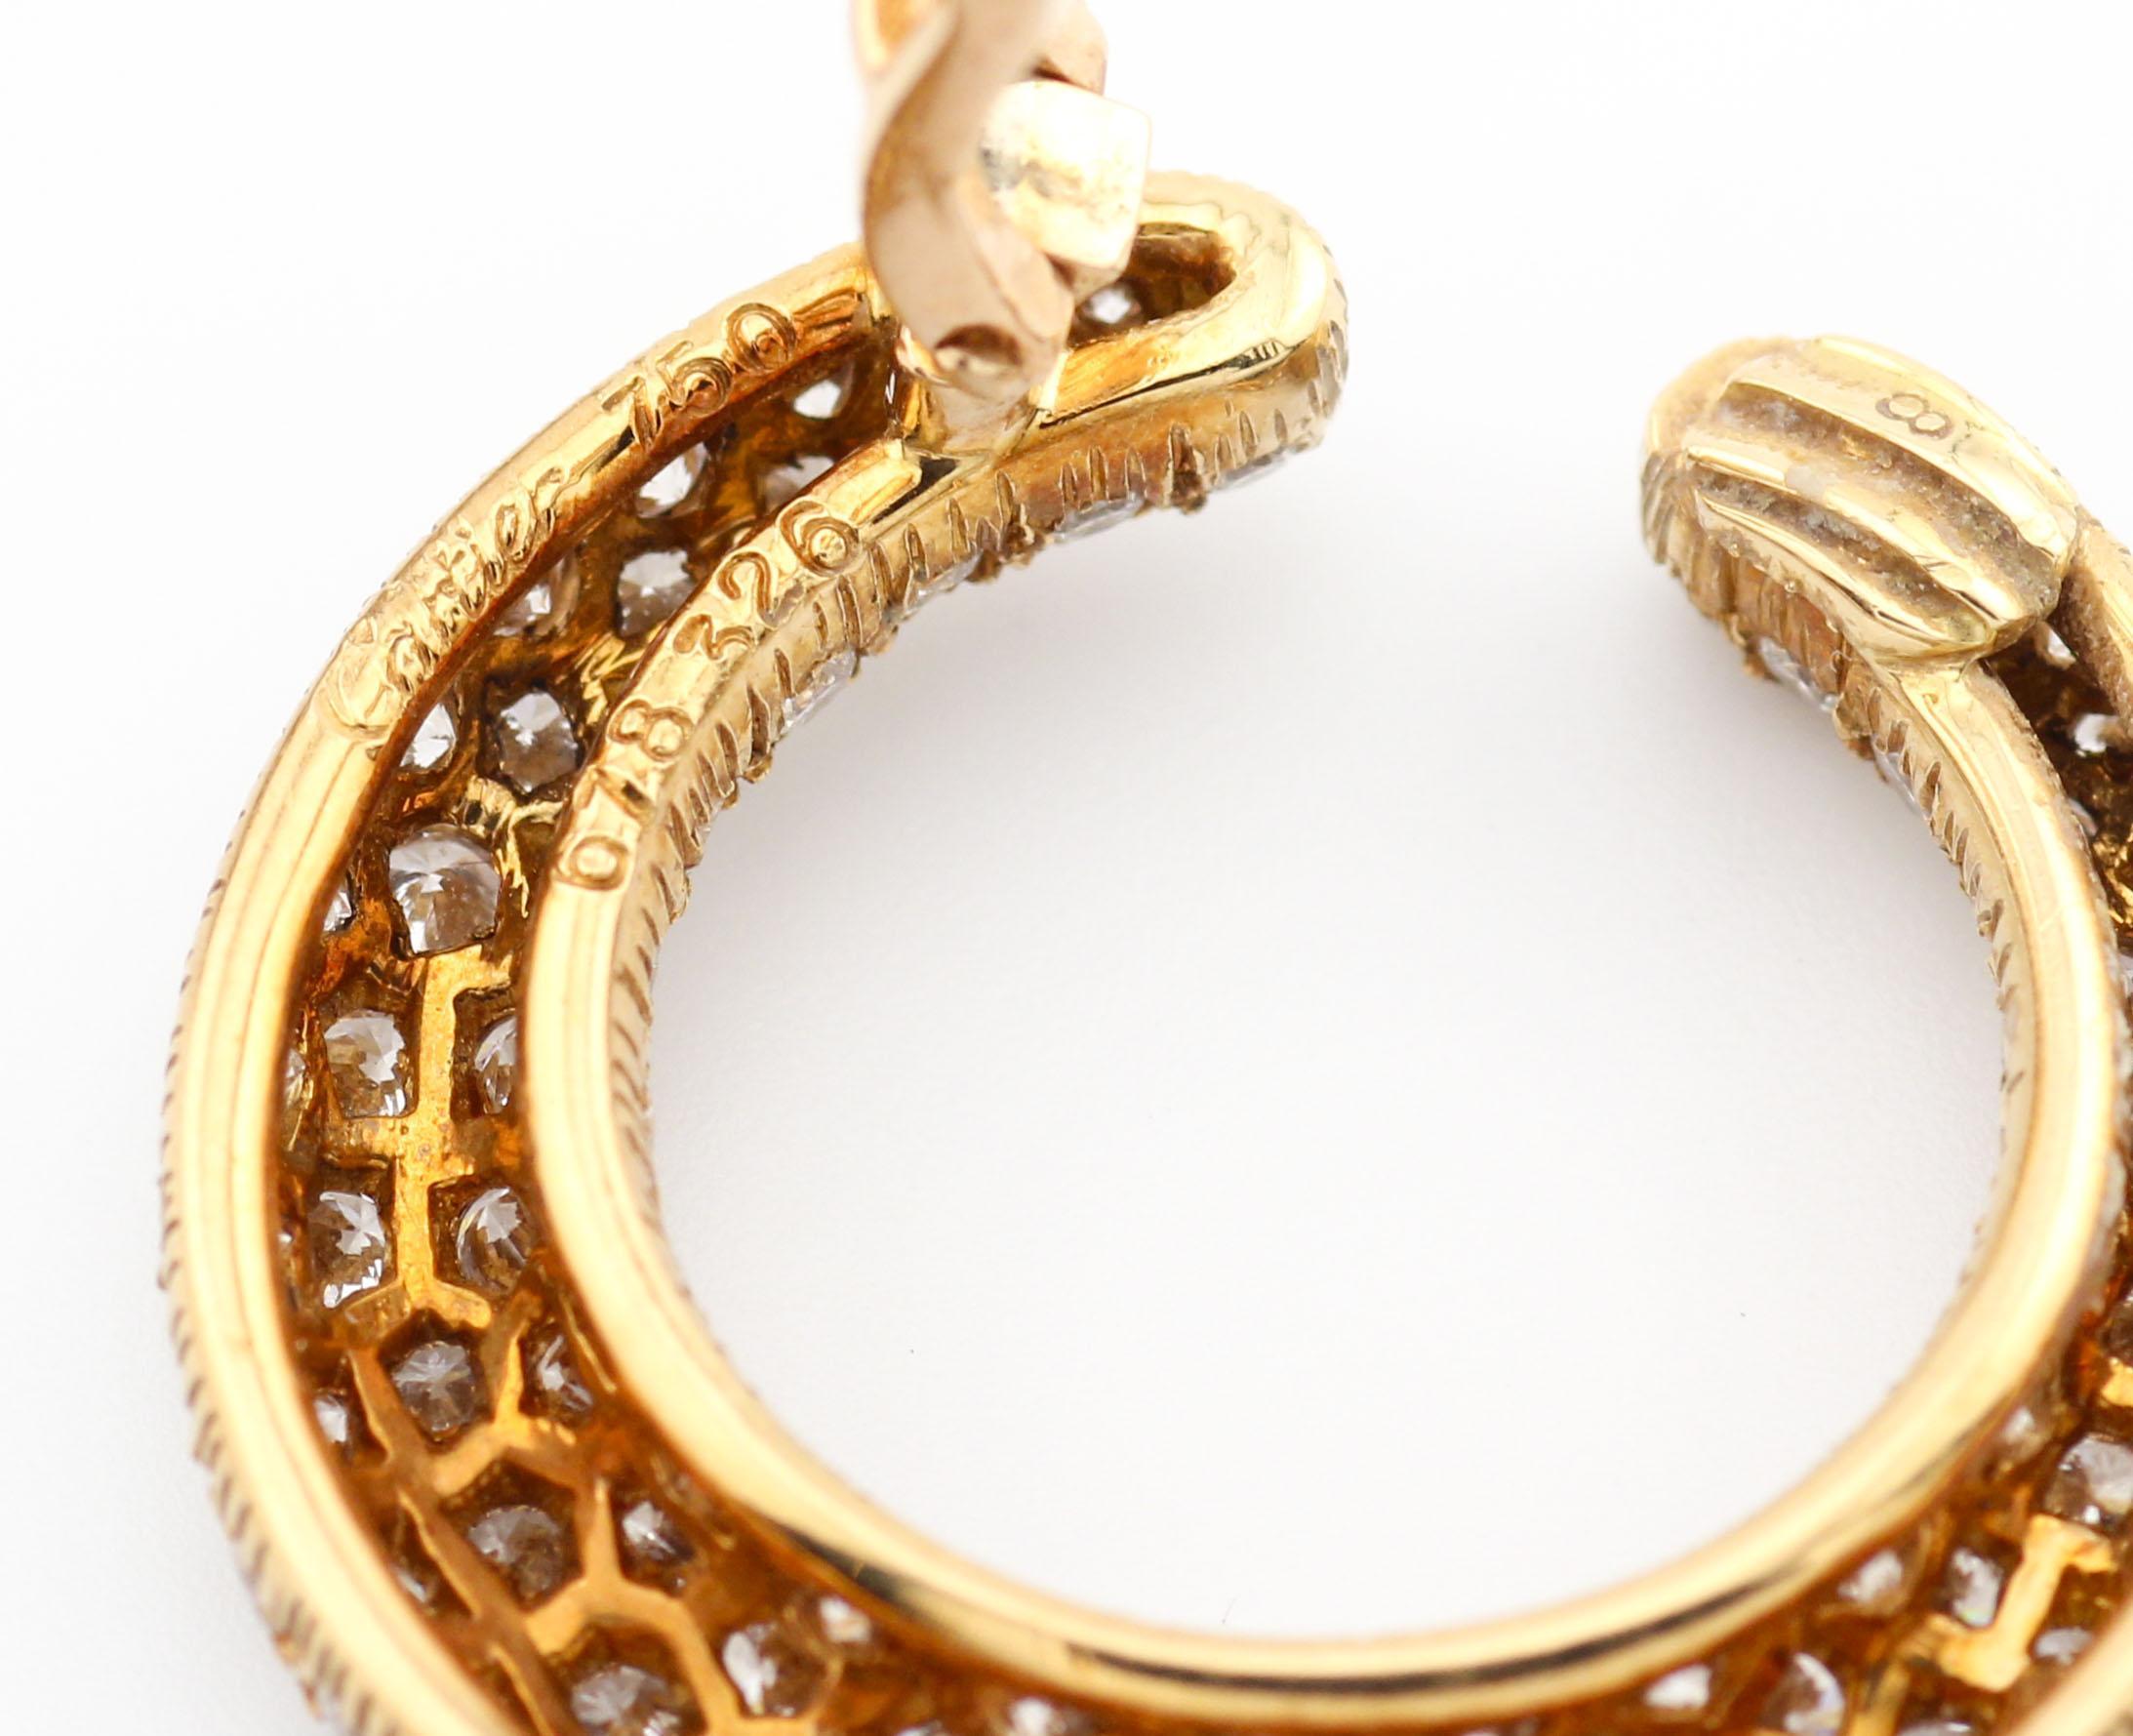 Brilliant Cut Cartier Creole Pave Diamond 18K Yellow Gold Hoop Earrings w/ Box and Certificate